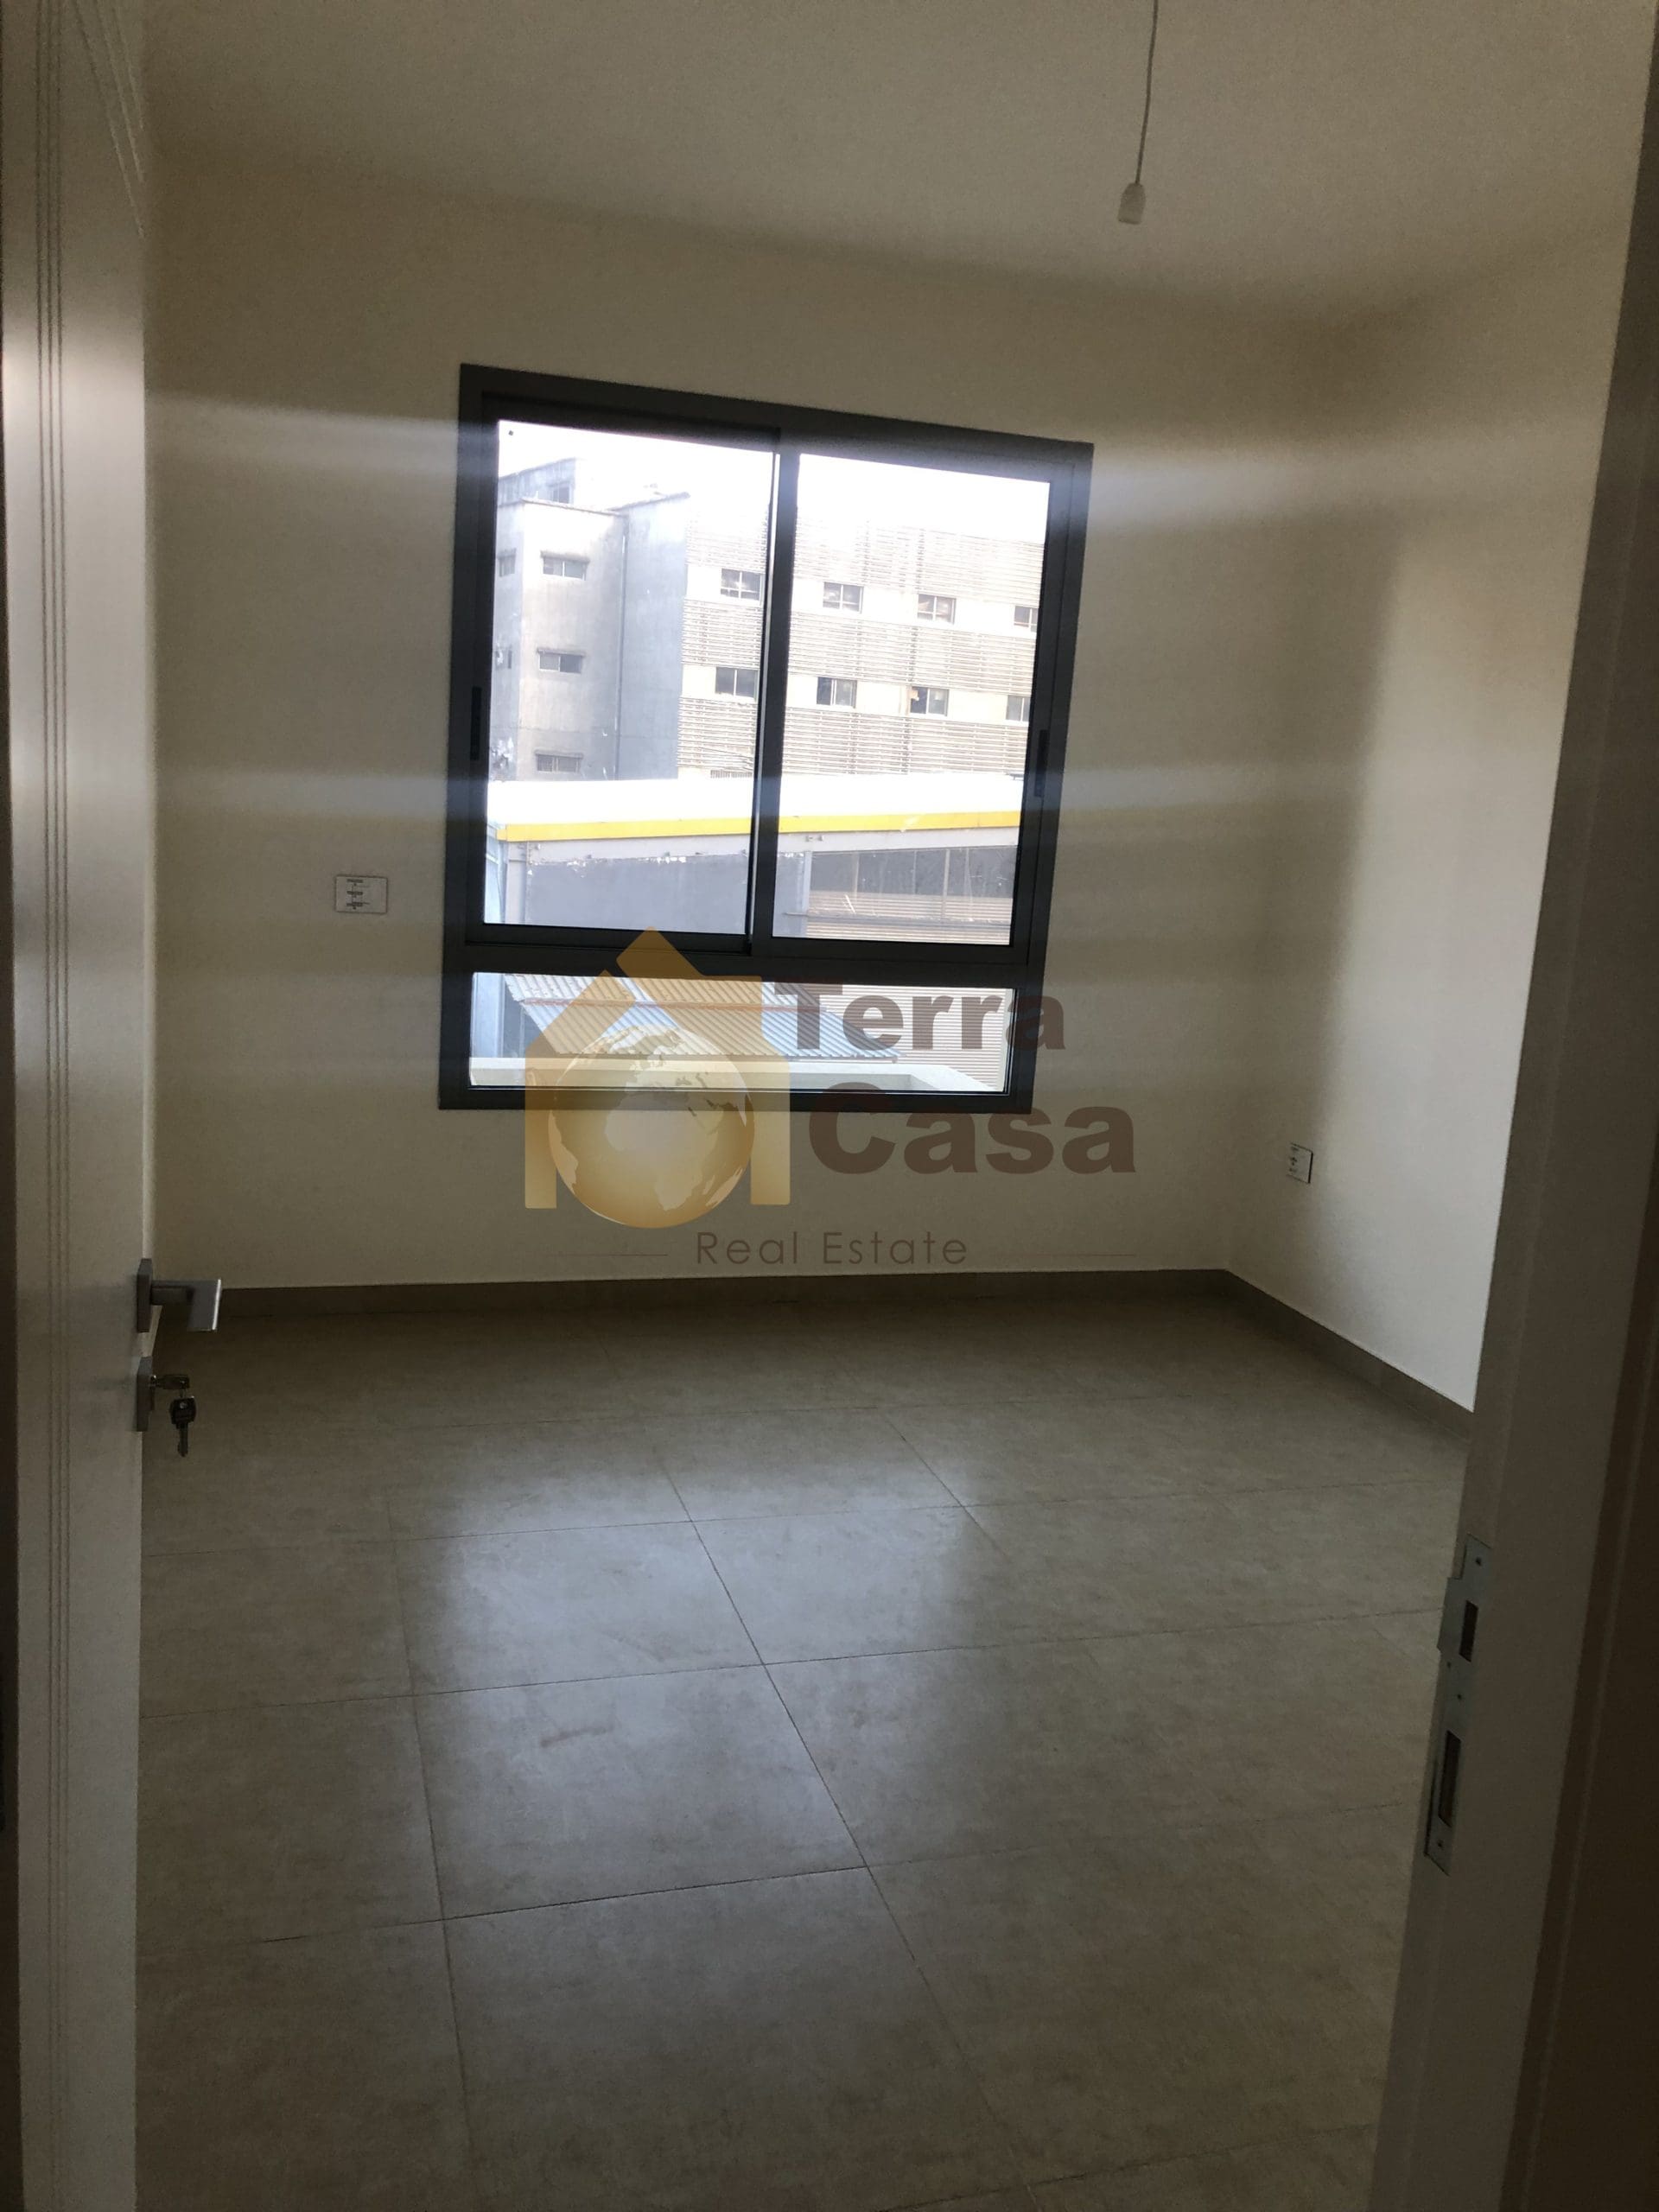 brand new apartment prime location  24/24 electricity ref#3465